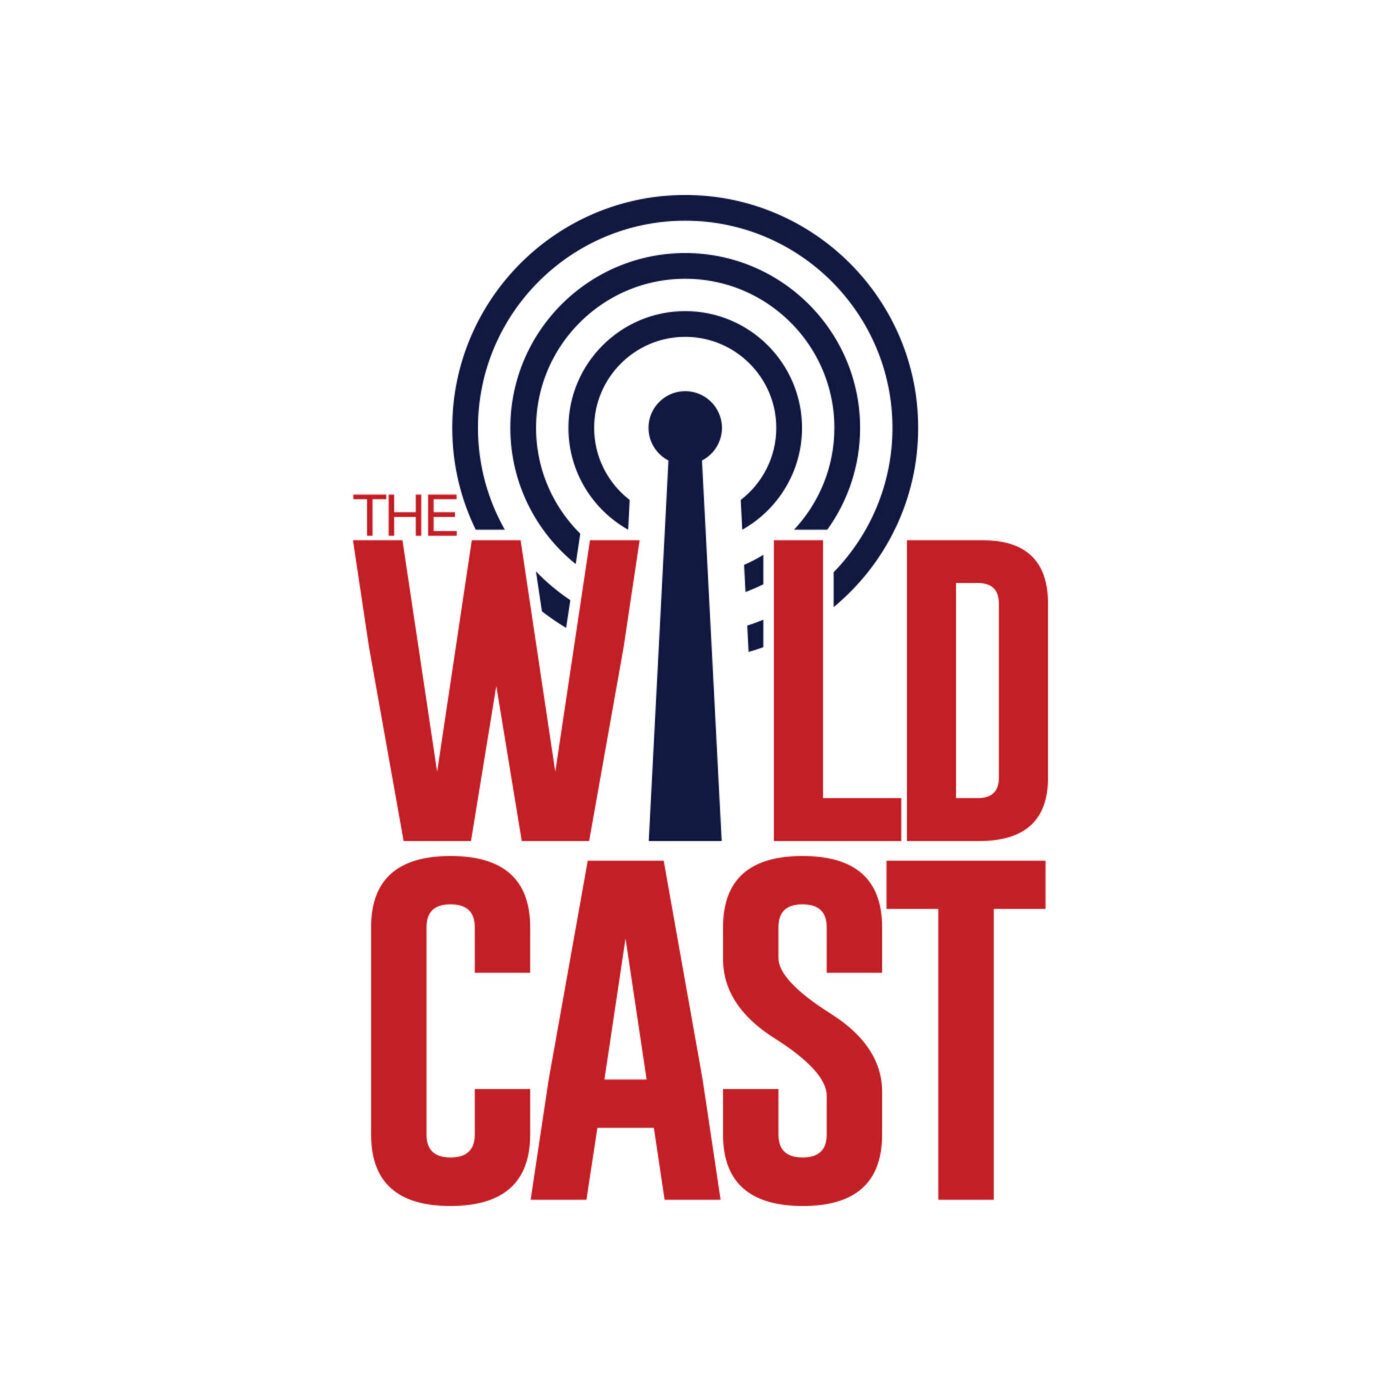 The Wildcast, Episode 425: How can Arizona pull off a win over Mississippi State in Starkville?